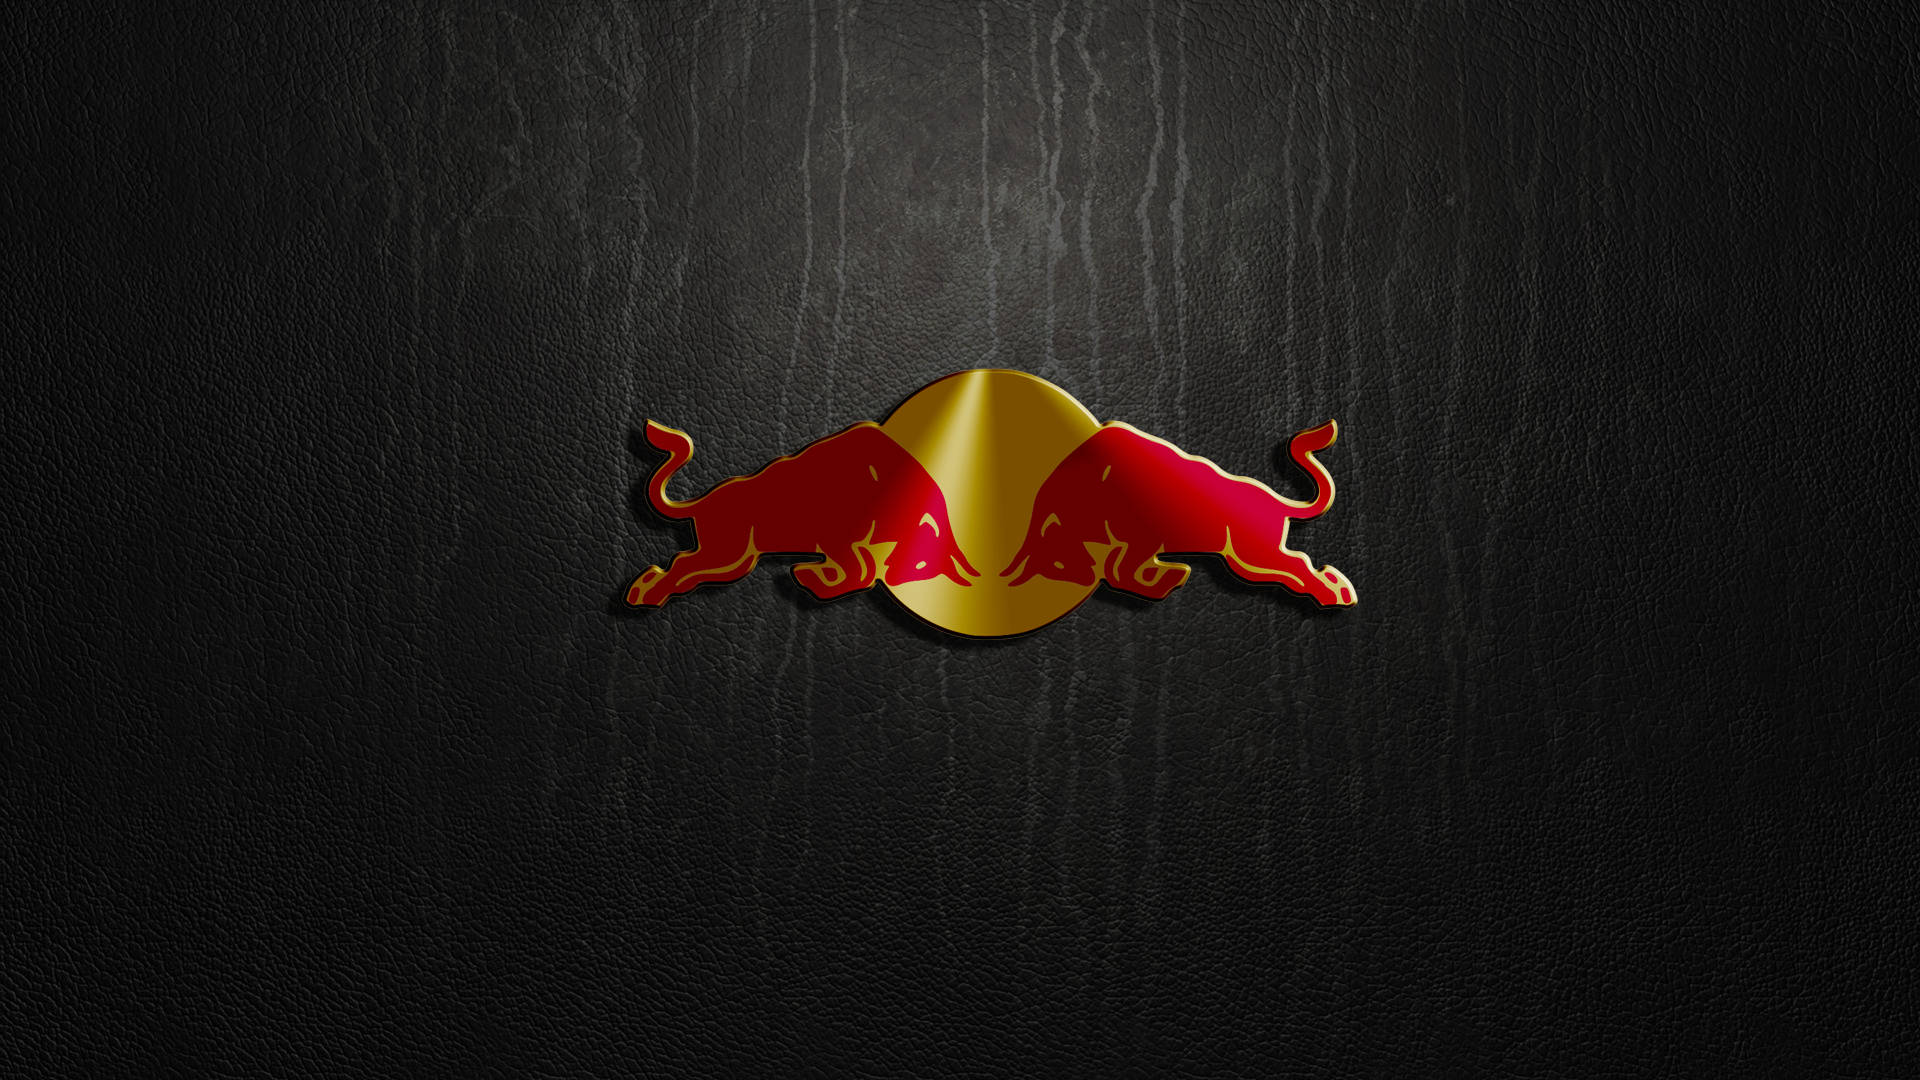 [100+] Red Bull F1 Backgrounds